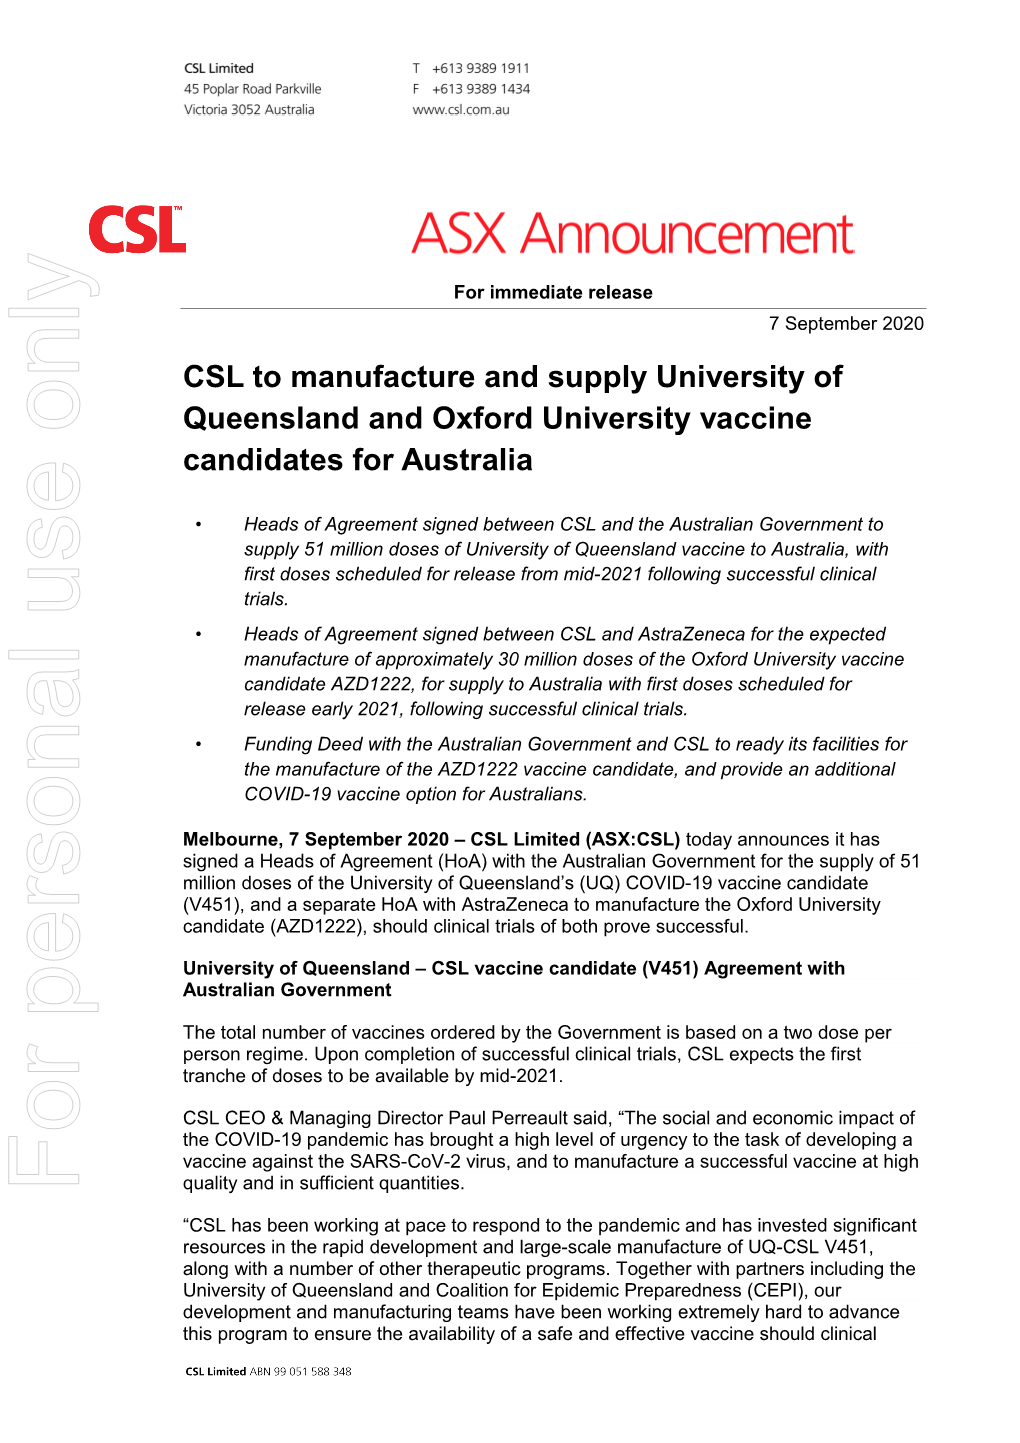 CSL to Manufacture and Supply University of Queensland and Oxford University Vaccine Candidates for Australia